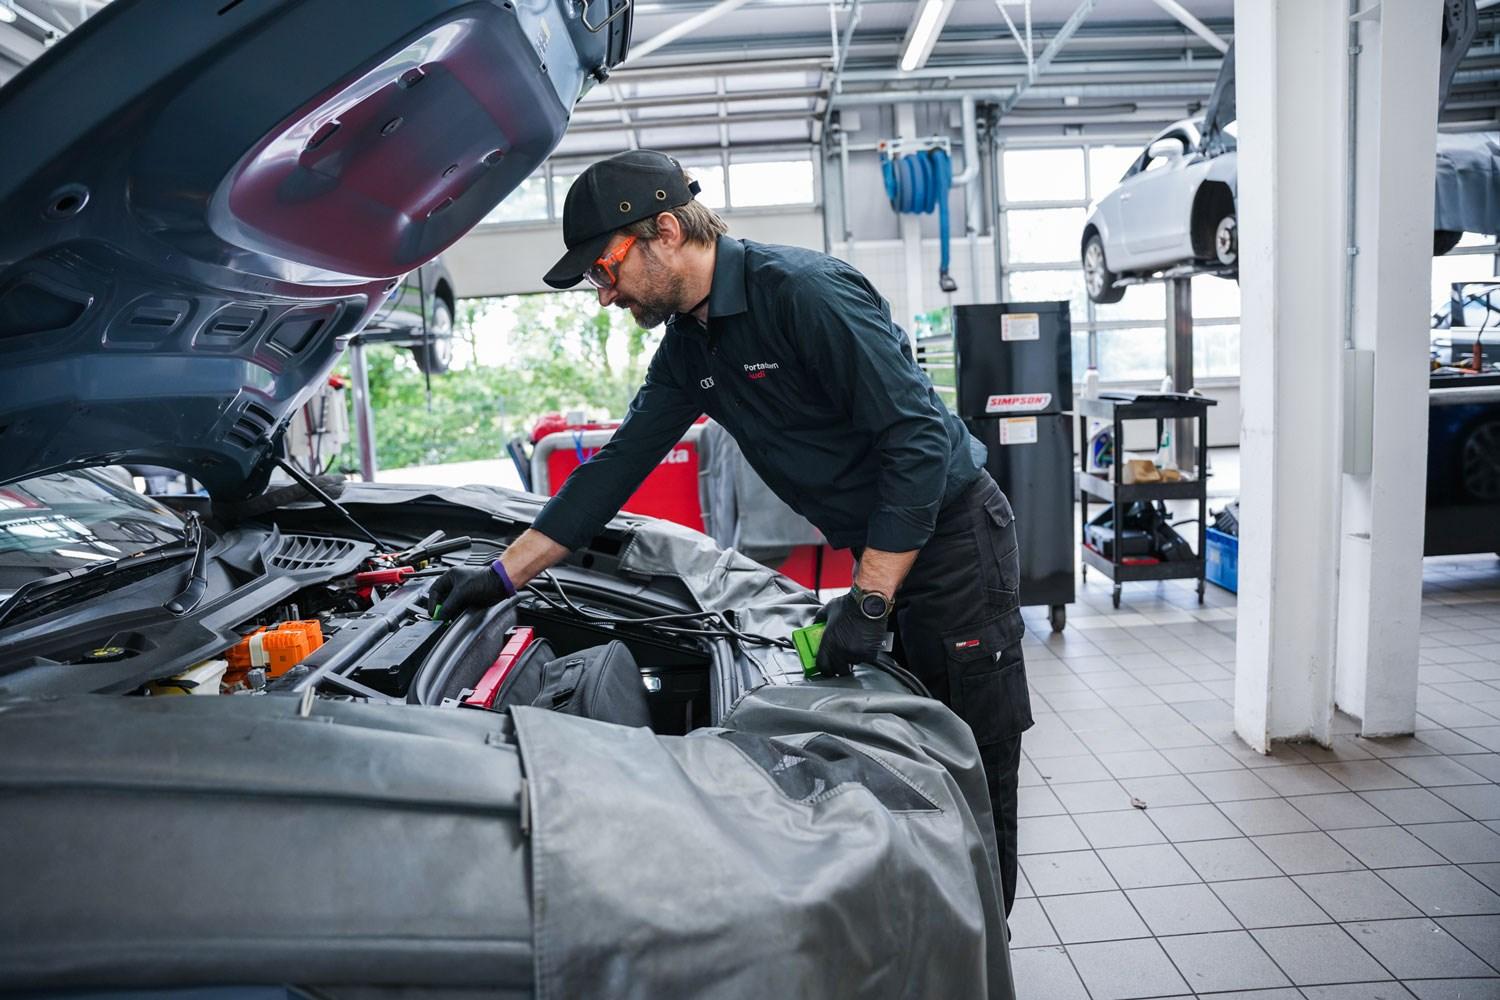 Audi Repair Specialist checks under the hood of an Audi vehicle during routine maintenance at Portadown Audi